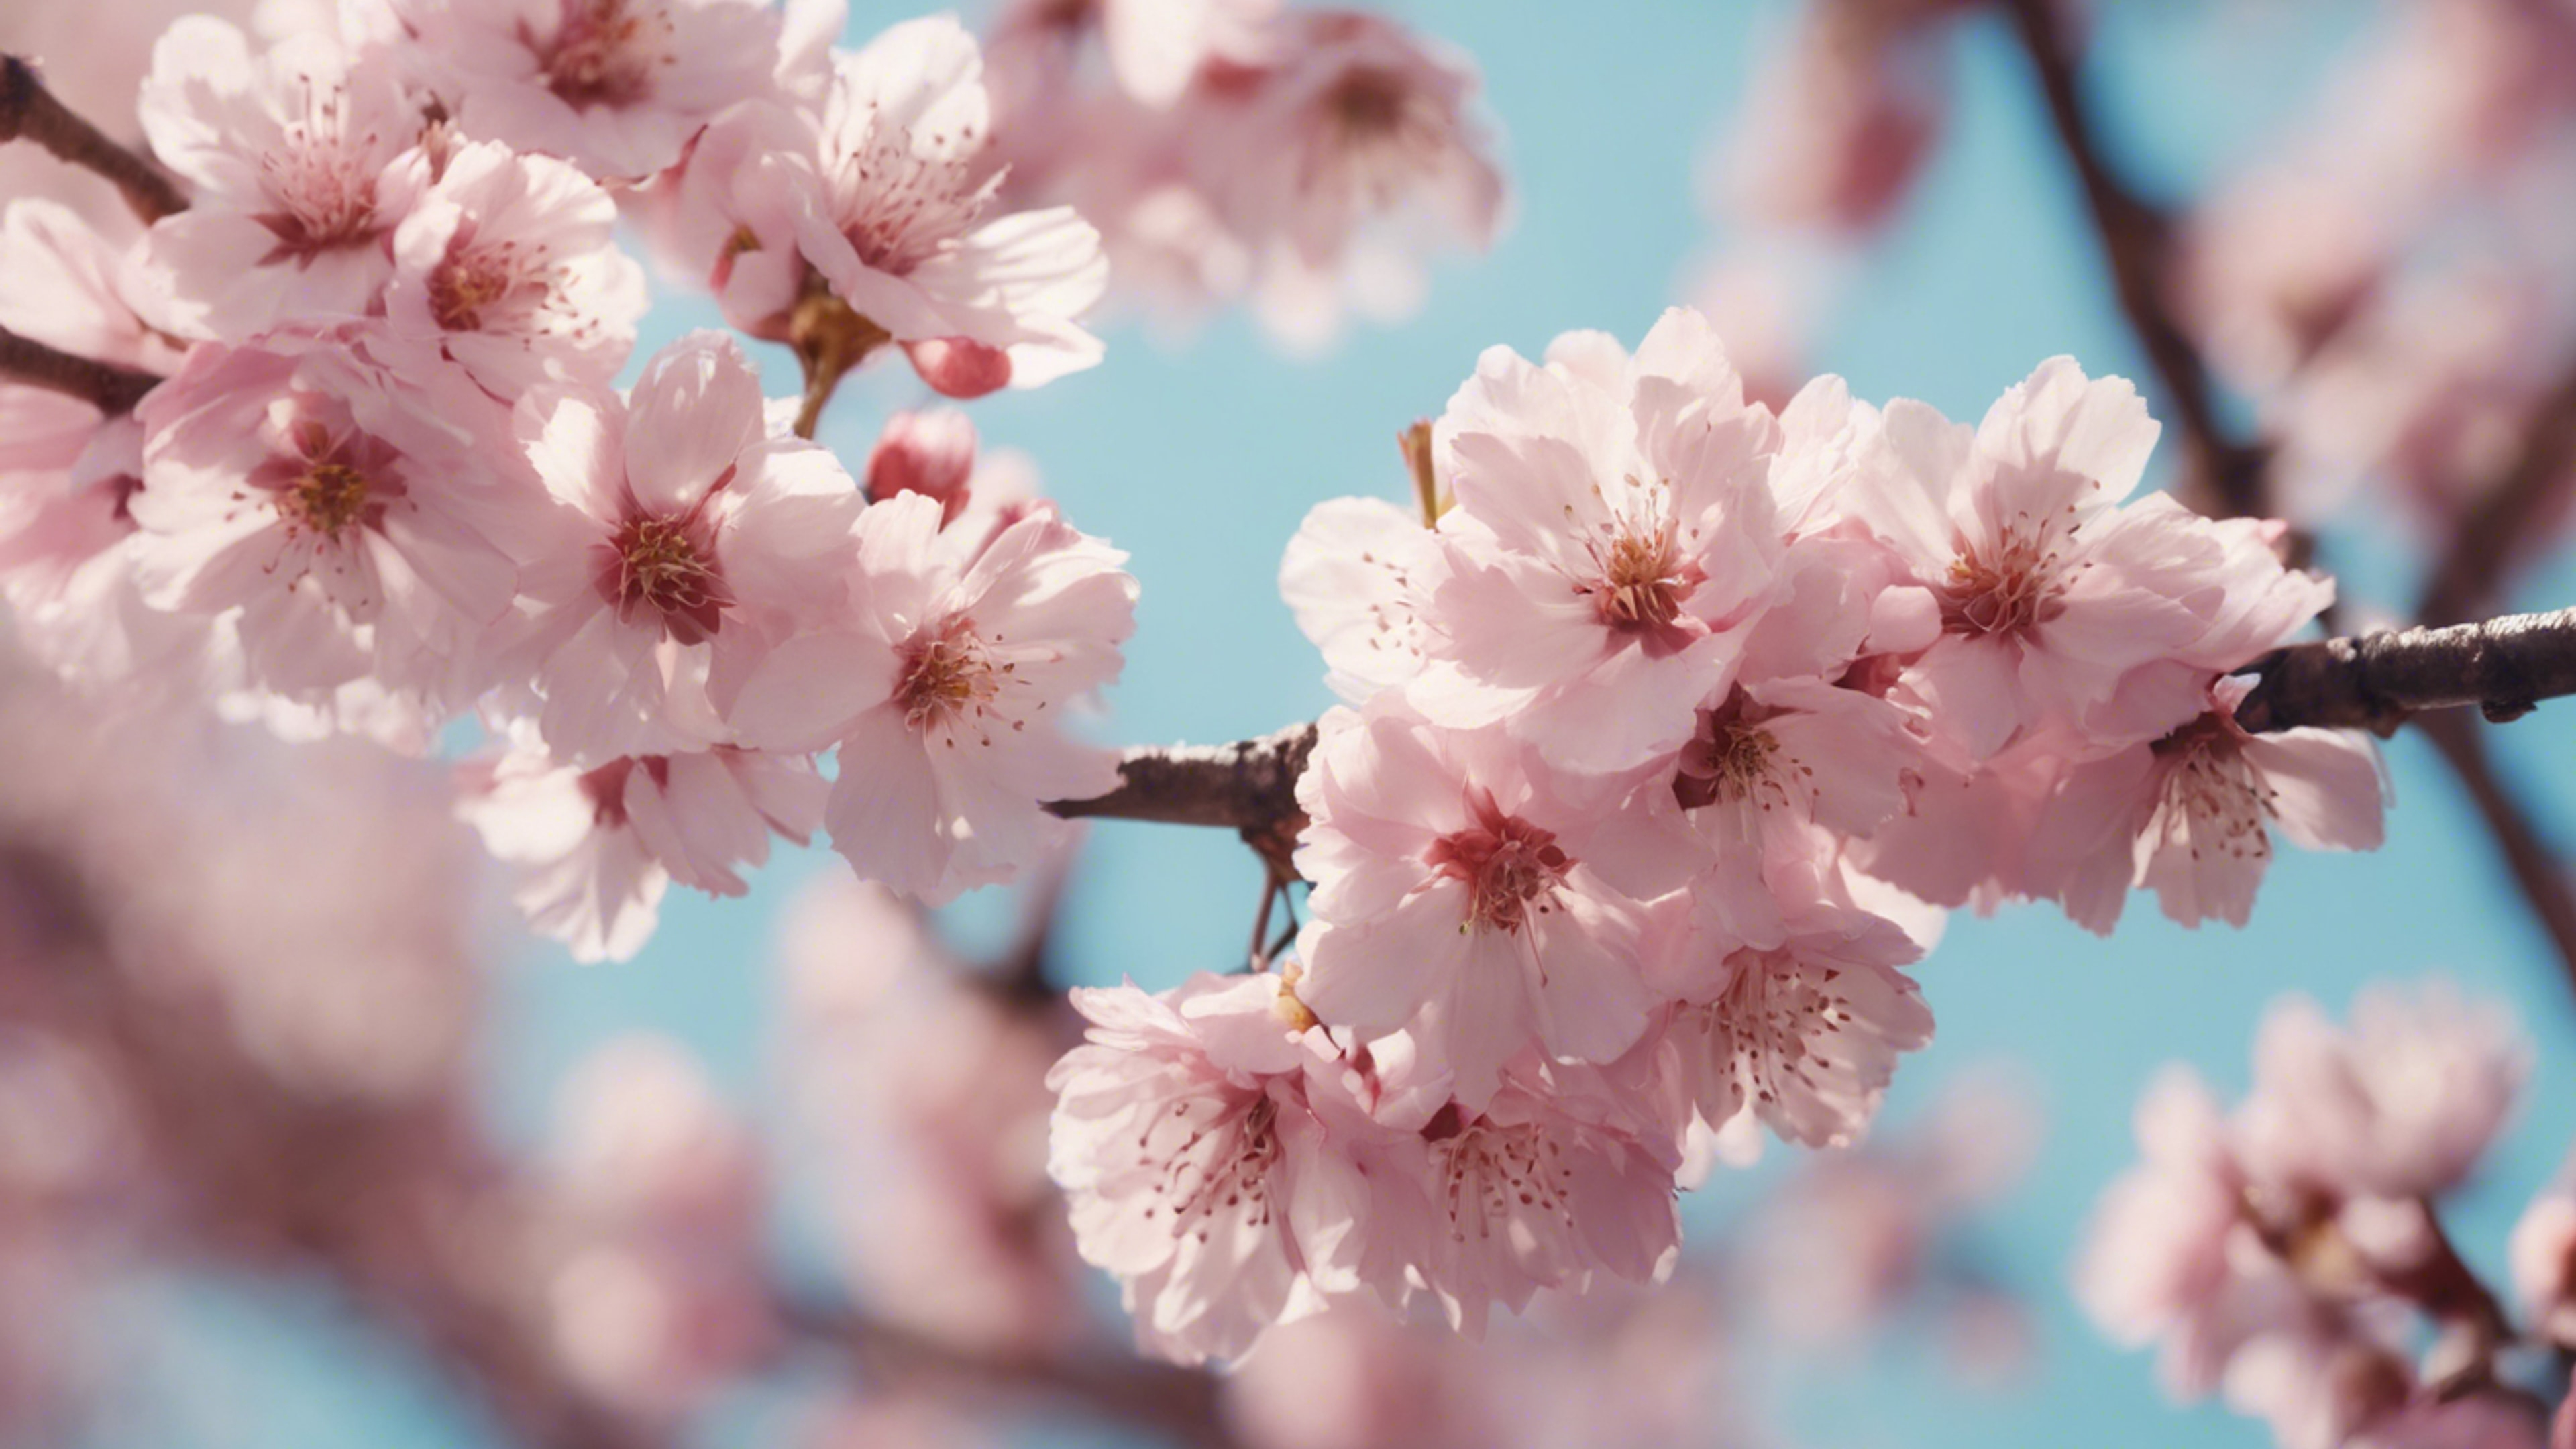 A vibrant scene of pastel pink cherry blossoms falling gently. טפט[c8bce7433f184c22a8f5]